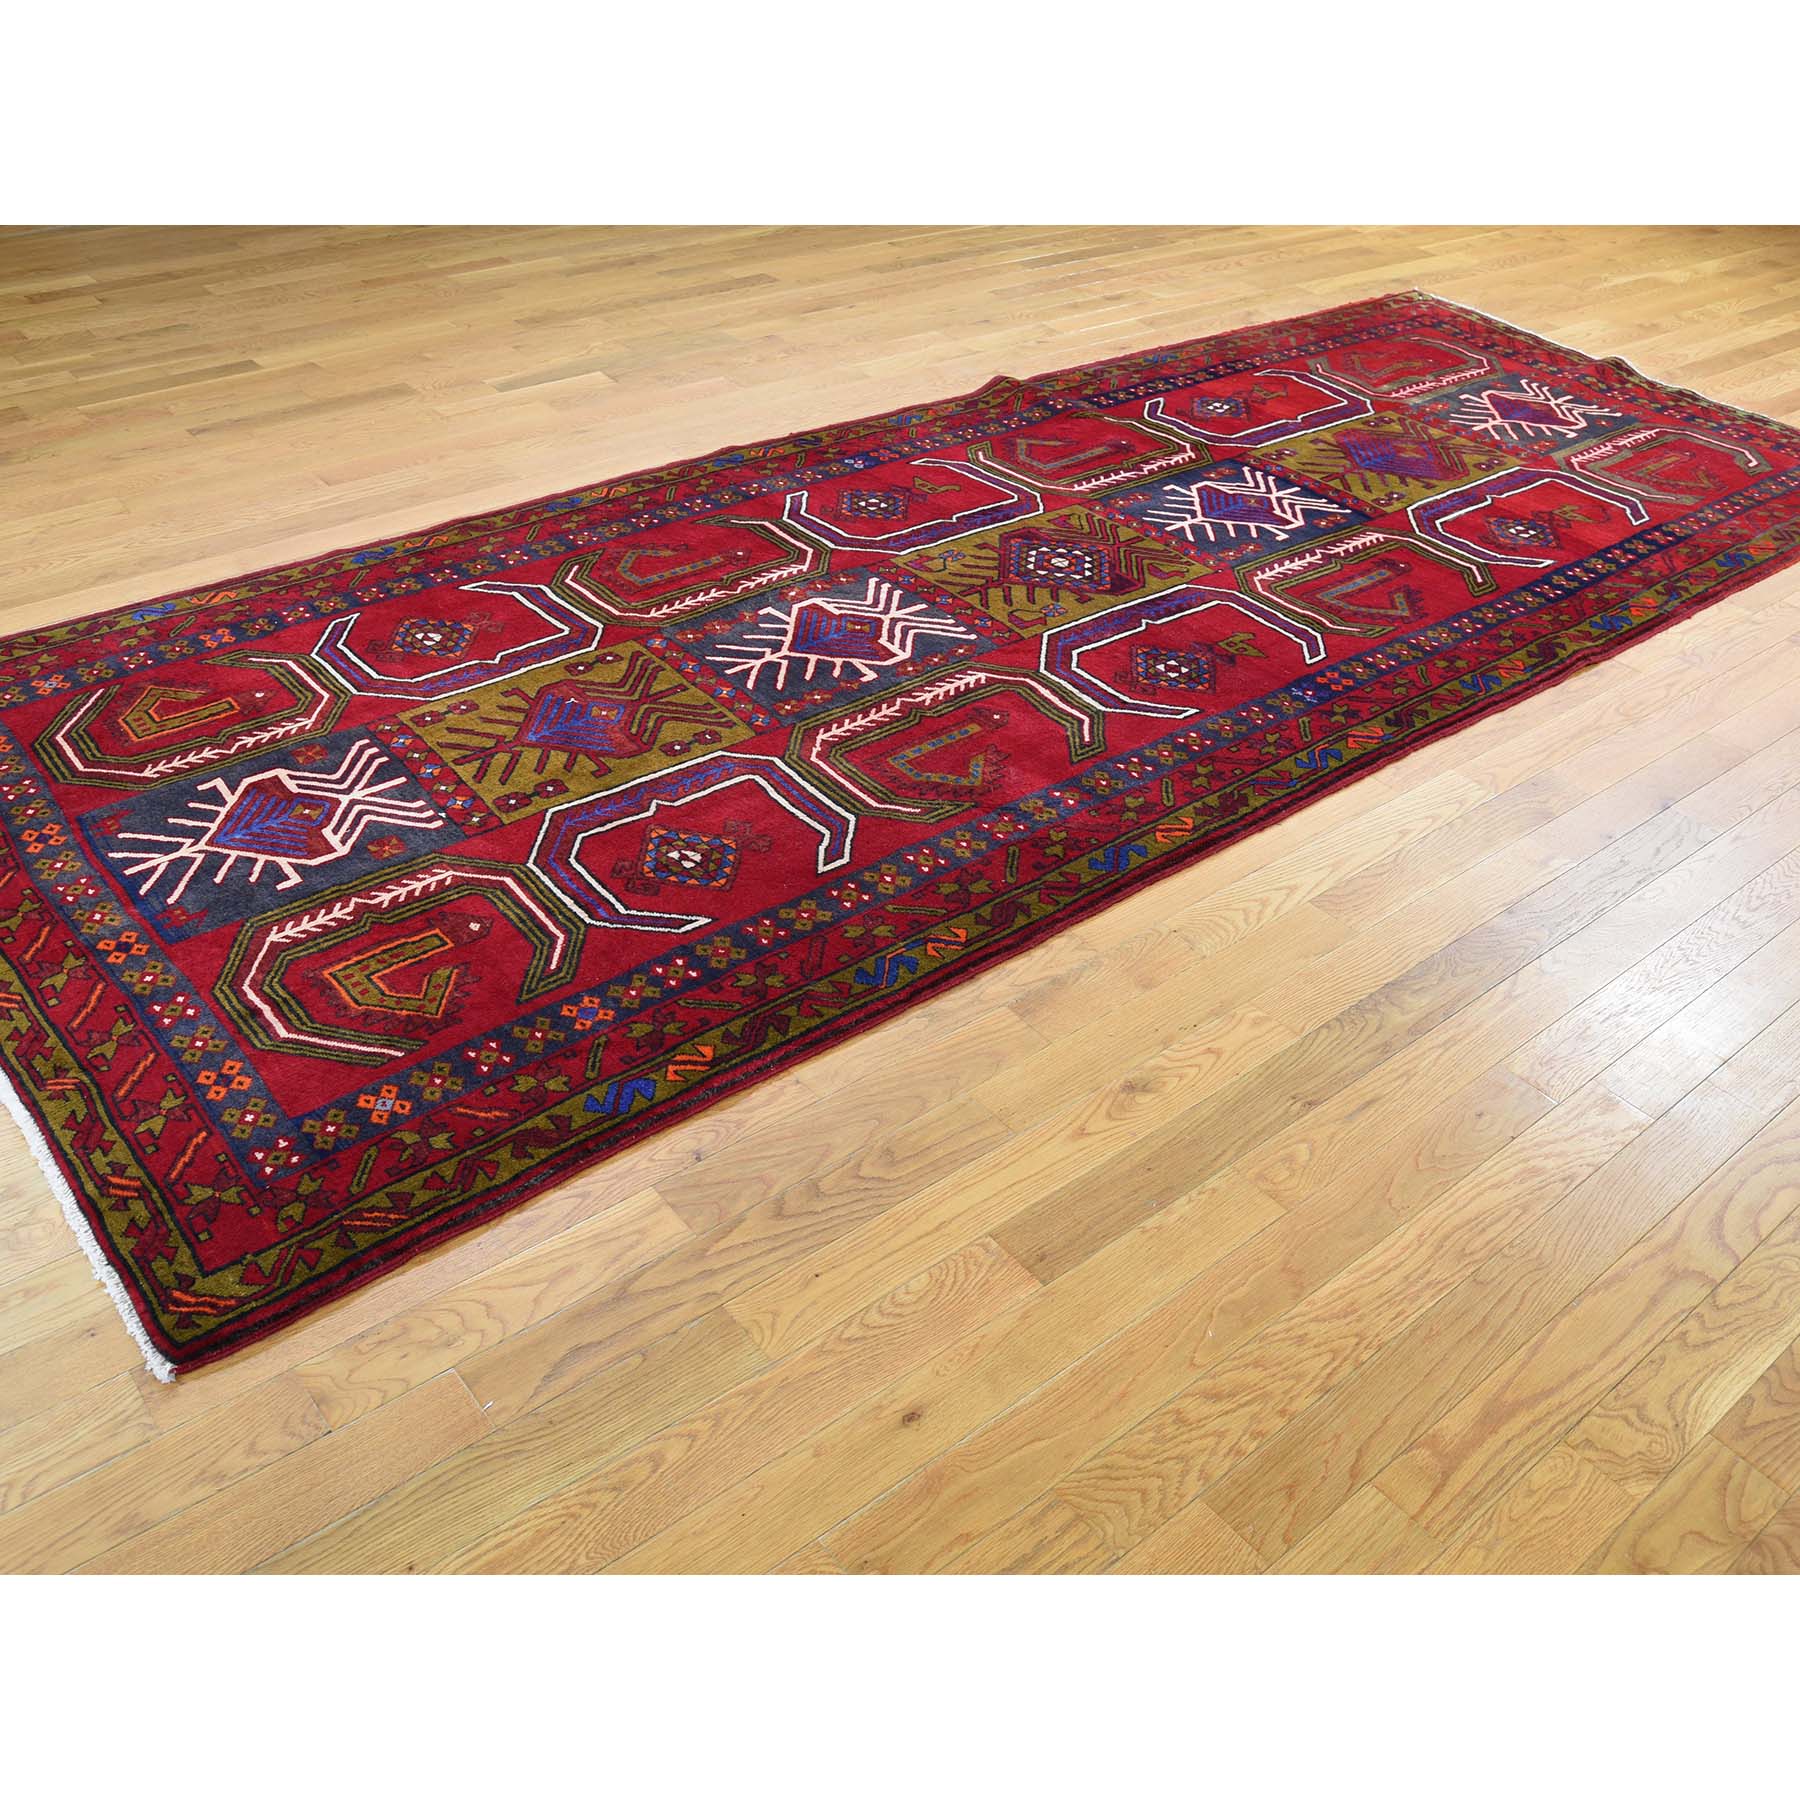 5-x12-5  Semi Antique Northeast Pure Wool Wide Gallery Runner Hand-Knotted Oriental Rug 